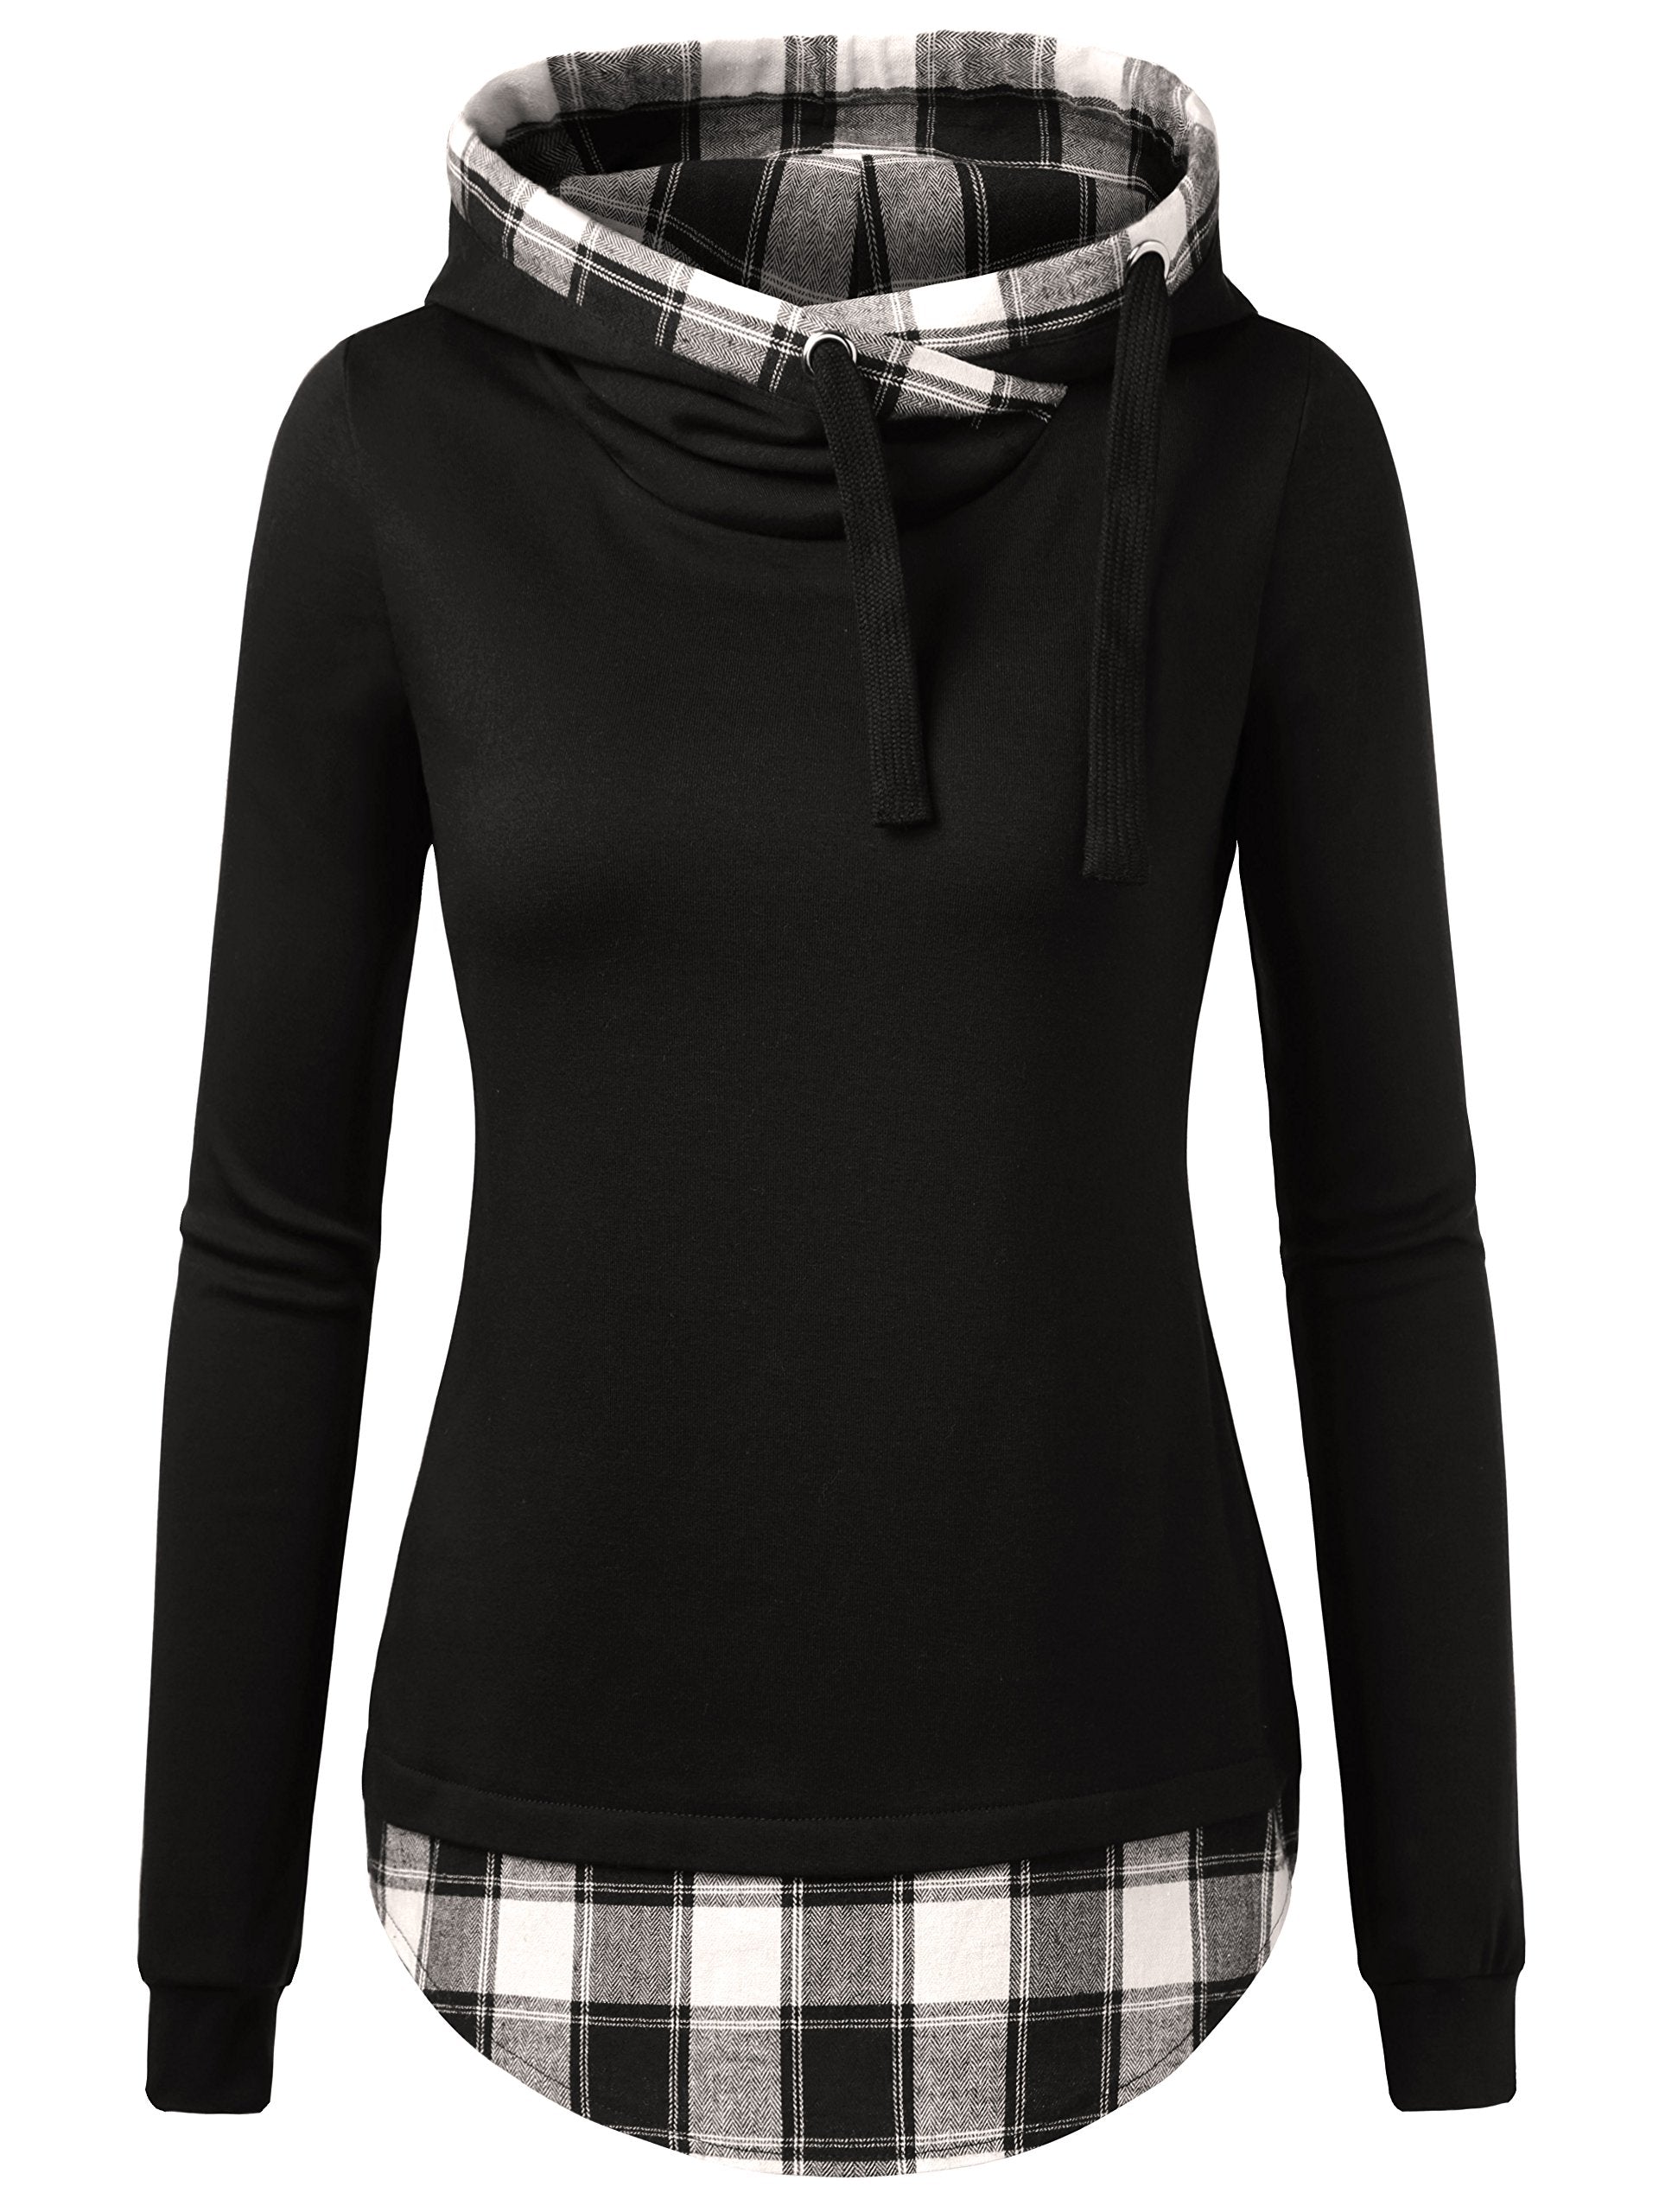 DJT Funnel Neck Black White Plaid Check Contrast Pullover Women's Hoodie Tops